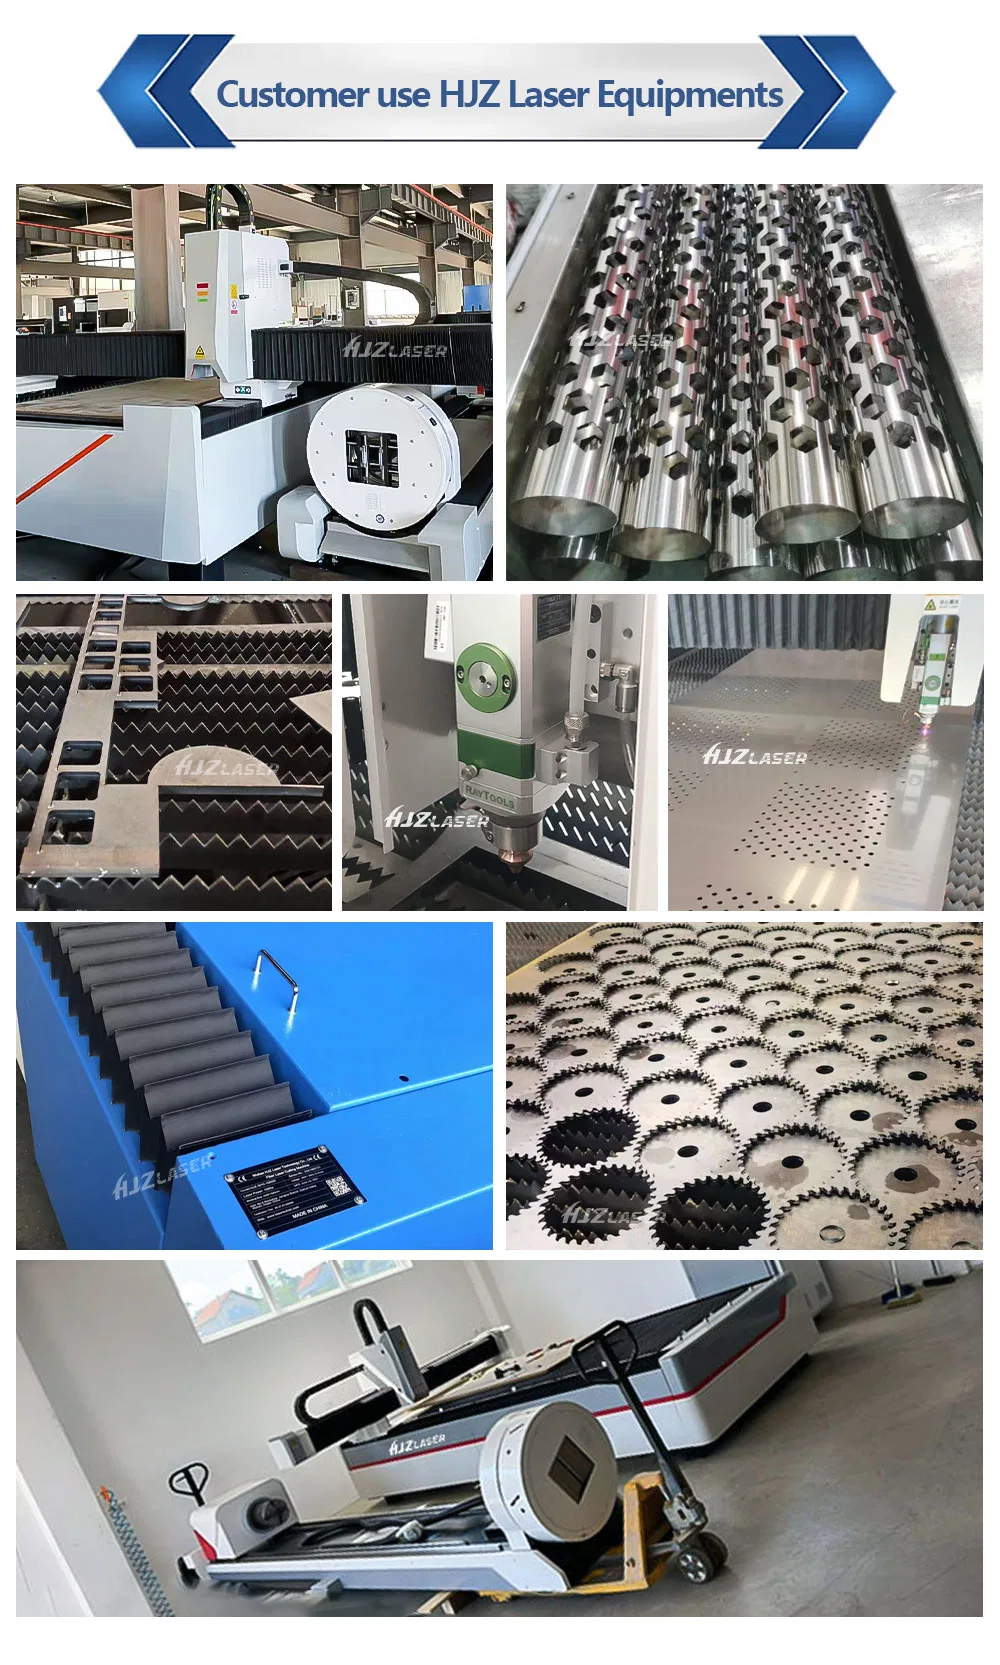 10mm Carbon Steel Pipes Sheet and Tube 3015 Fiber Laser Cutting Machine Cutting Metal Sheets CNC Machine Price for Sale